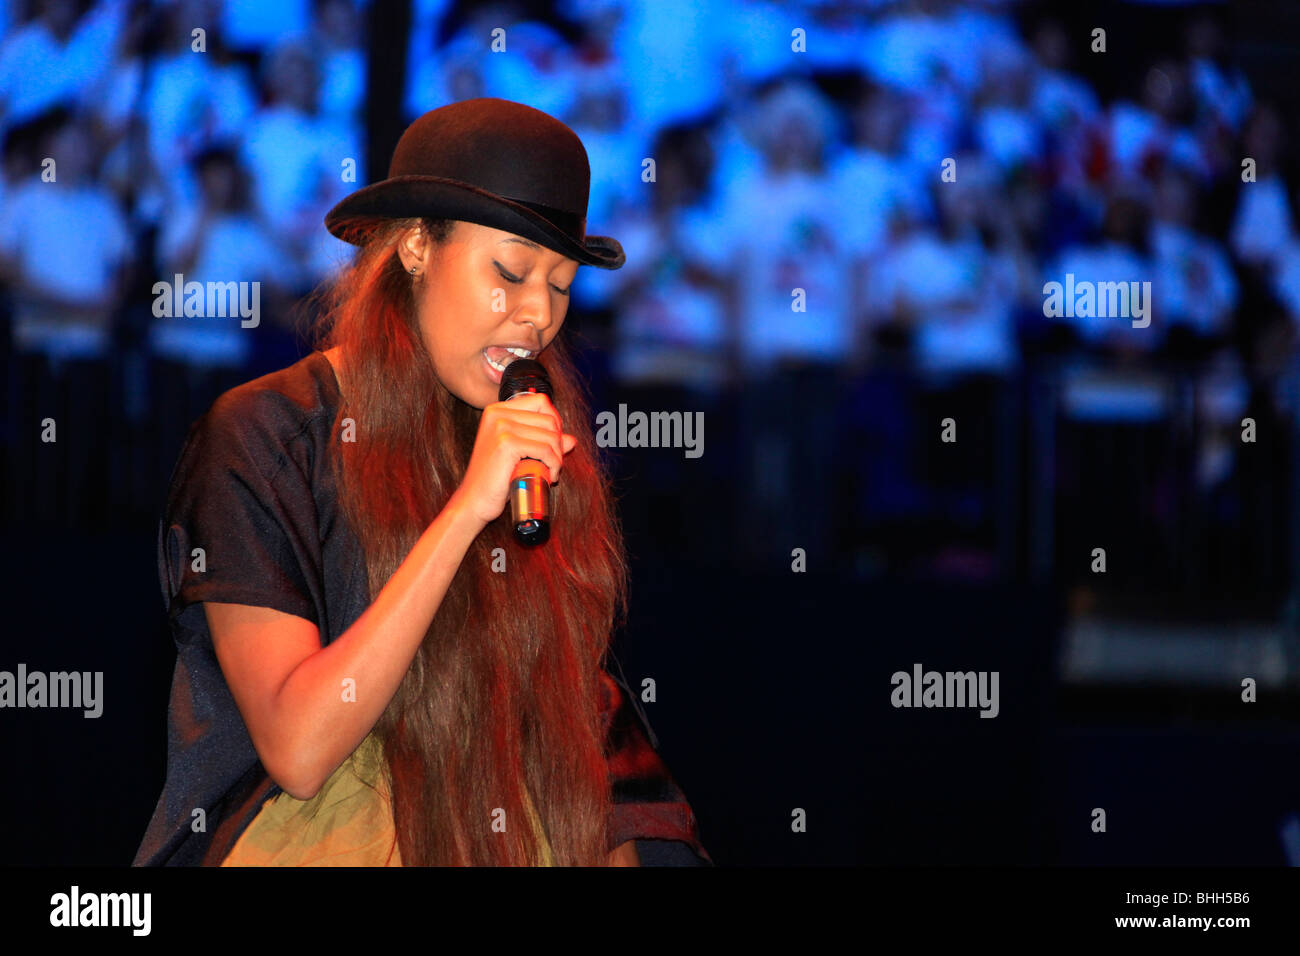 Singer Songwriter  'VV Brown' on stage at Young Voices concert tour  at  London O2, December 2009. Stock Photo